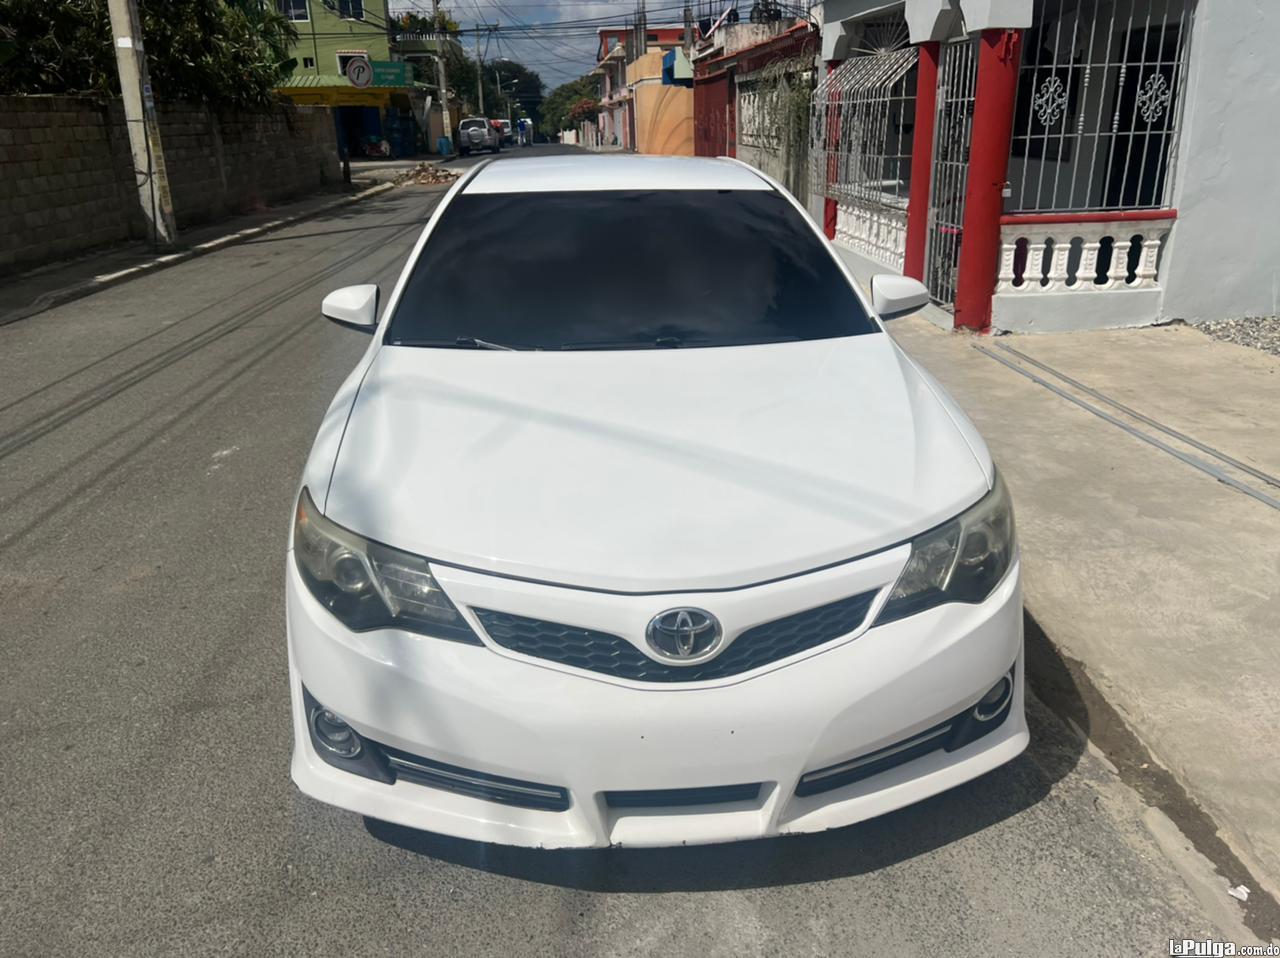 Toyota Camry Se  2014 inicial 269 mil Foto 7138856-3.jpg